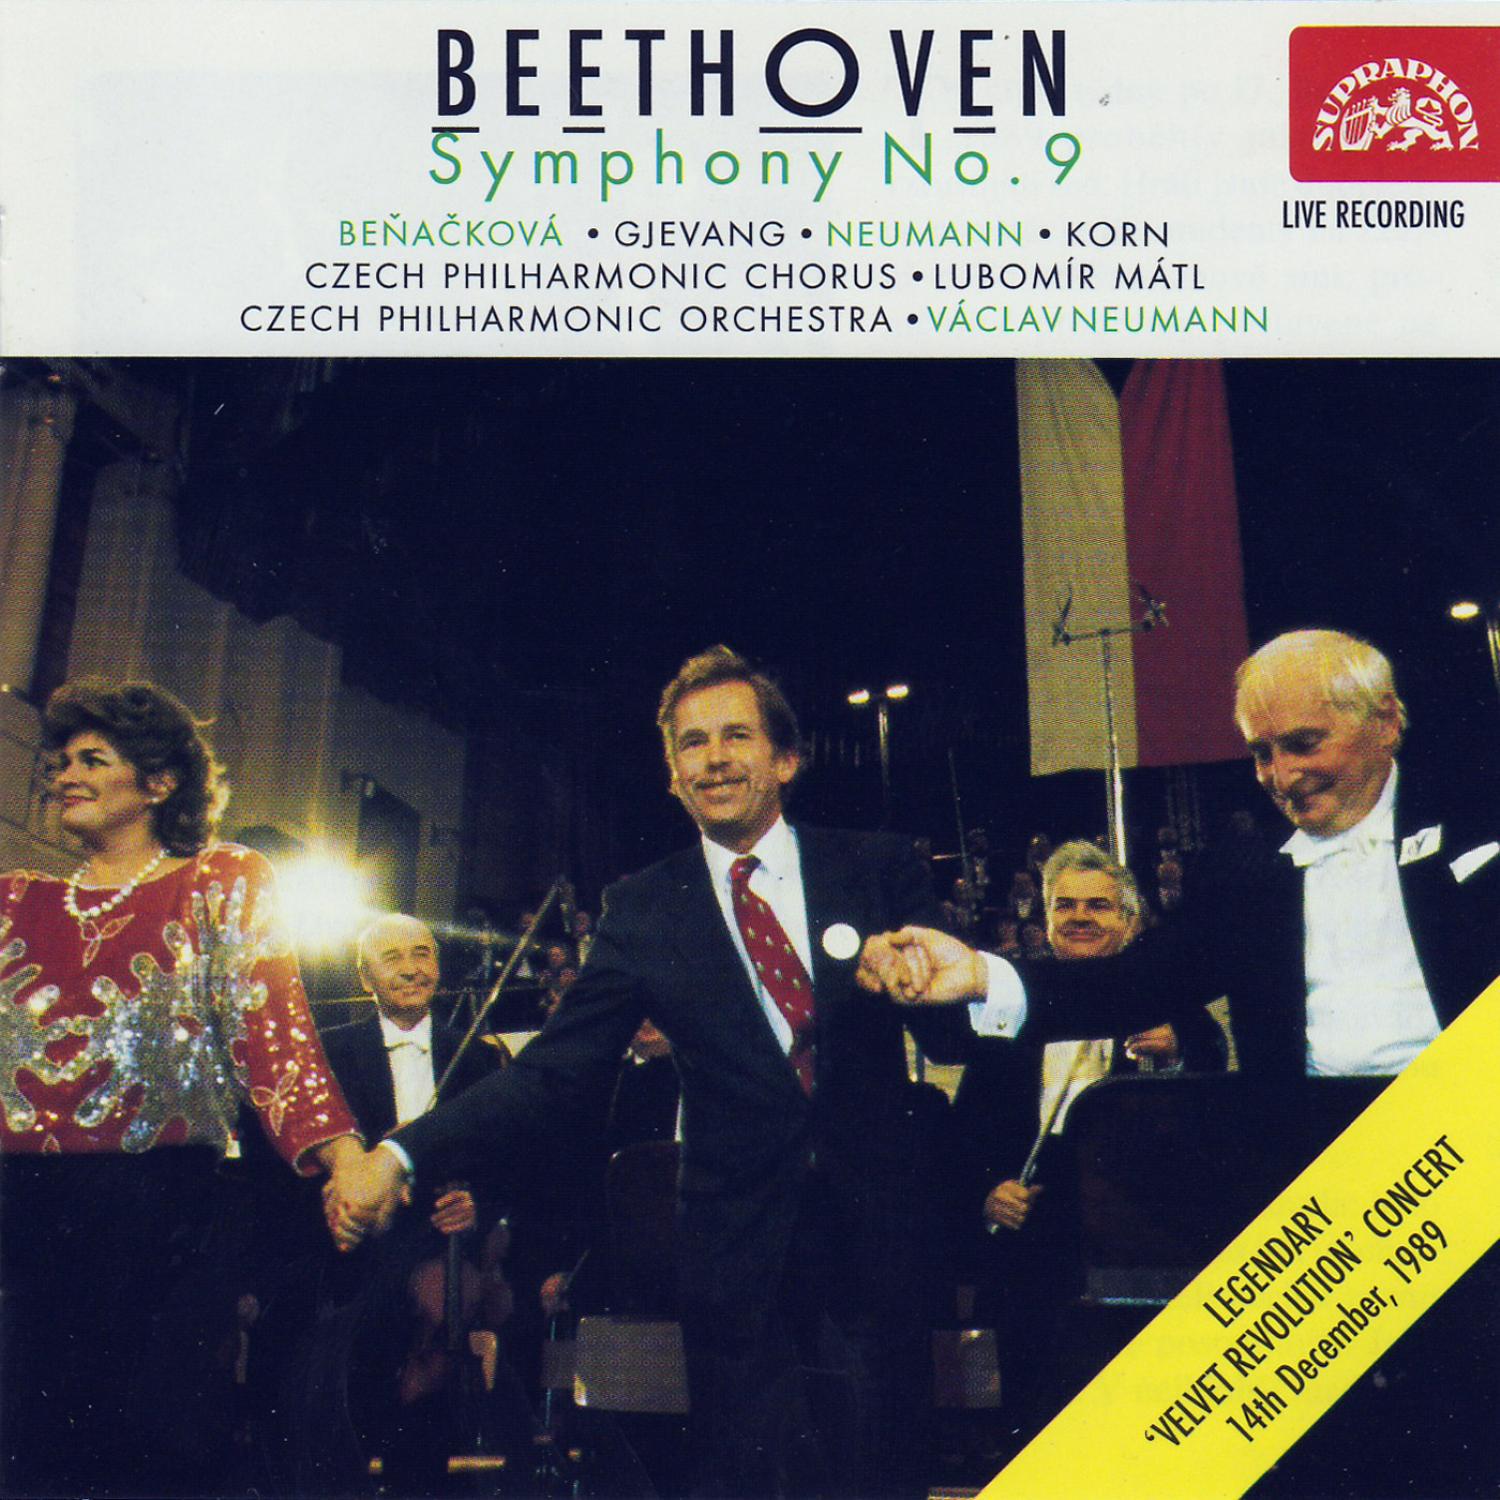 Czech Philharmonic Orchestra - Symphony No. 9 in D minor 'Choral', Op. 125: II. Molto vivace